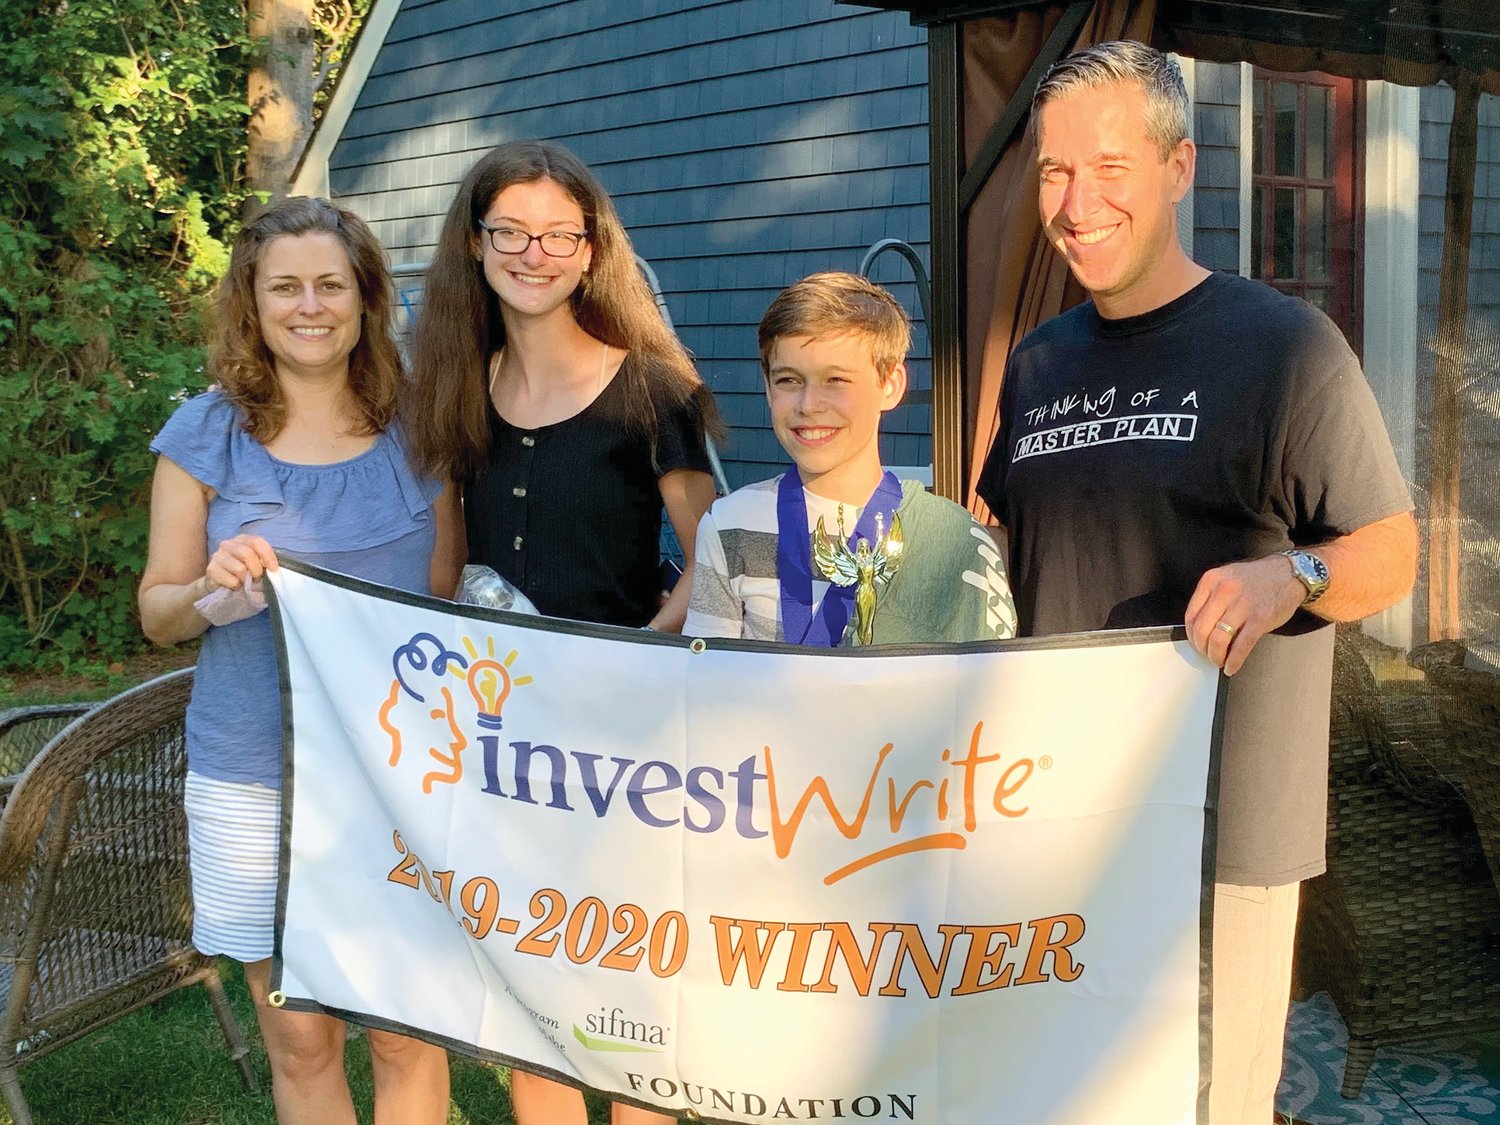 Evan Gendreau of Seekonk, Mass., smiles with his parents, Michael and Melanie, and sister Kelsey. The family was surprised at their home by Gendreau’s teacher Laura Doliber and St. Margaret School Principal Lee Ann Nunes, who informed Evan that he had won the National InvestWrite® Competition.